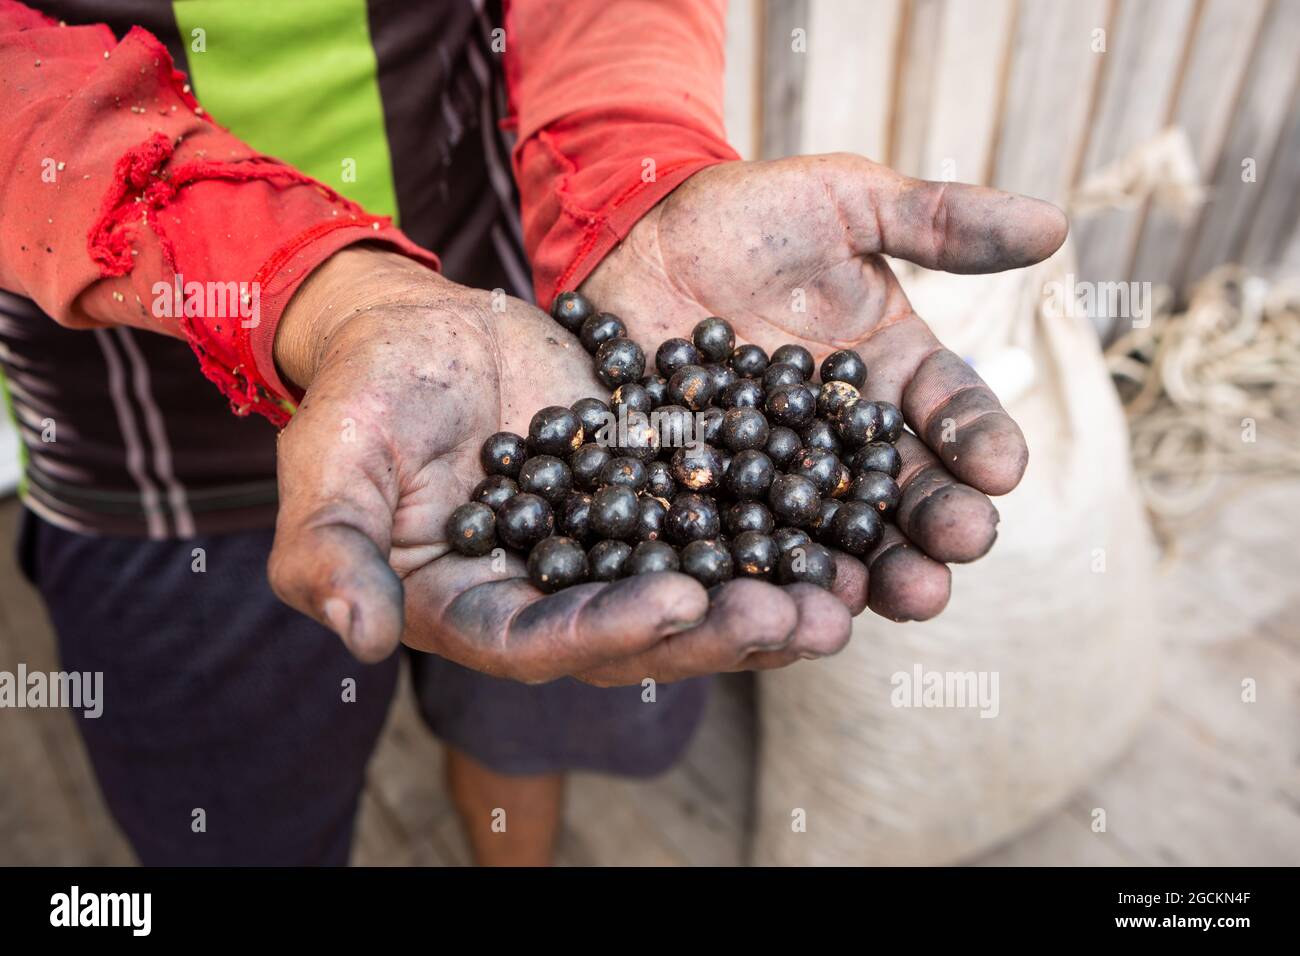 Close up of fresh acai berries fruit in man's dirty hand during harvest in the amazon rainforest, Brazil. Selective focus. Food, environment, ecology. Stock Photo